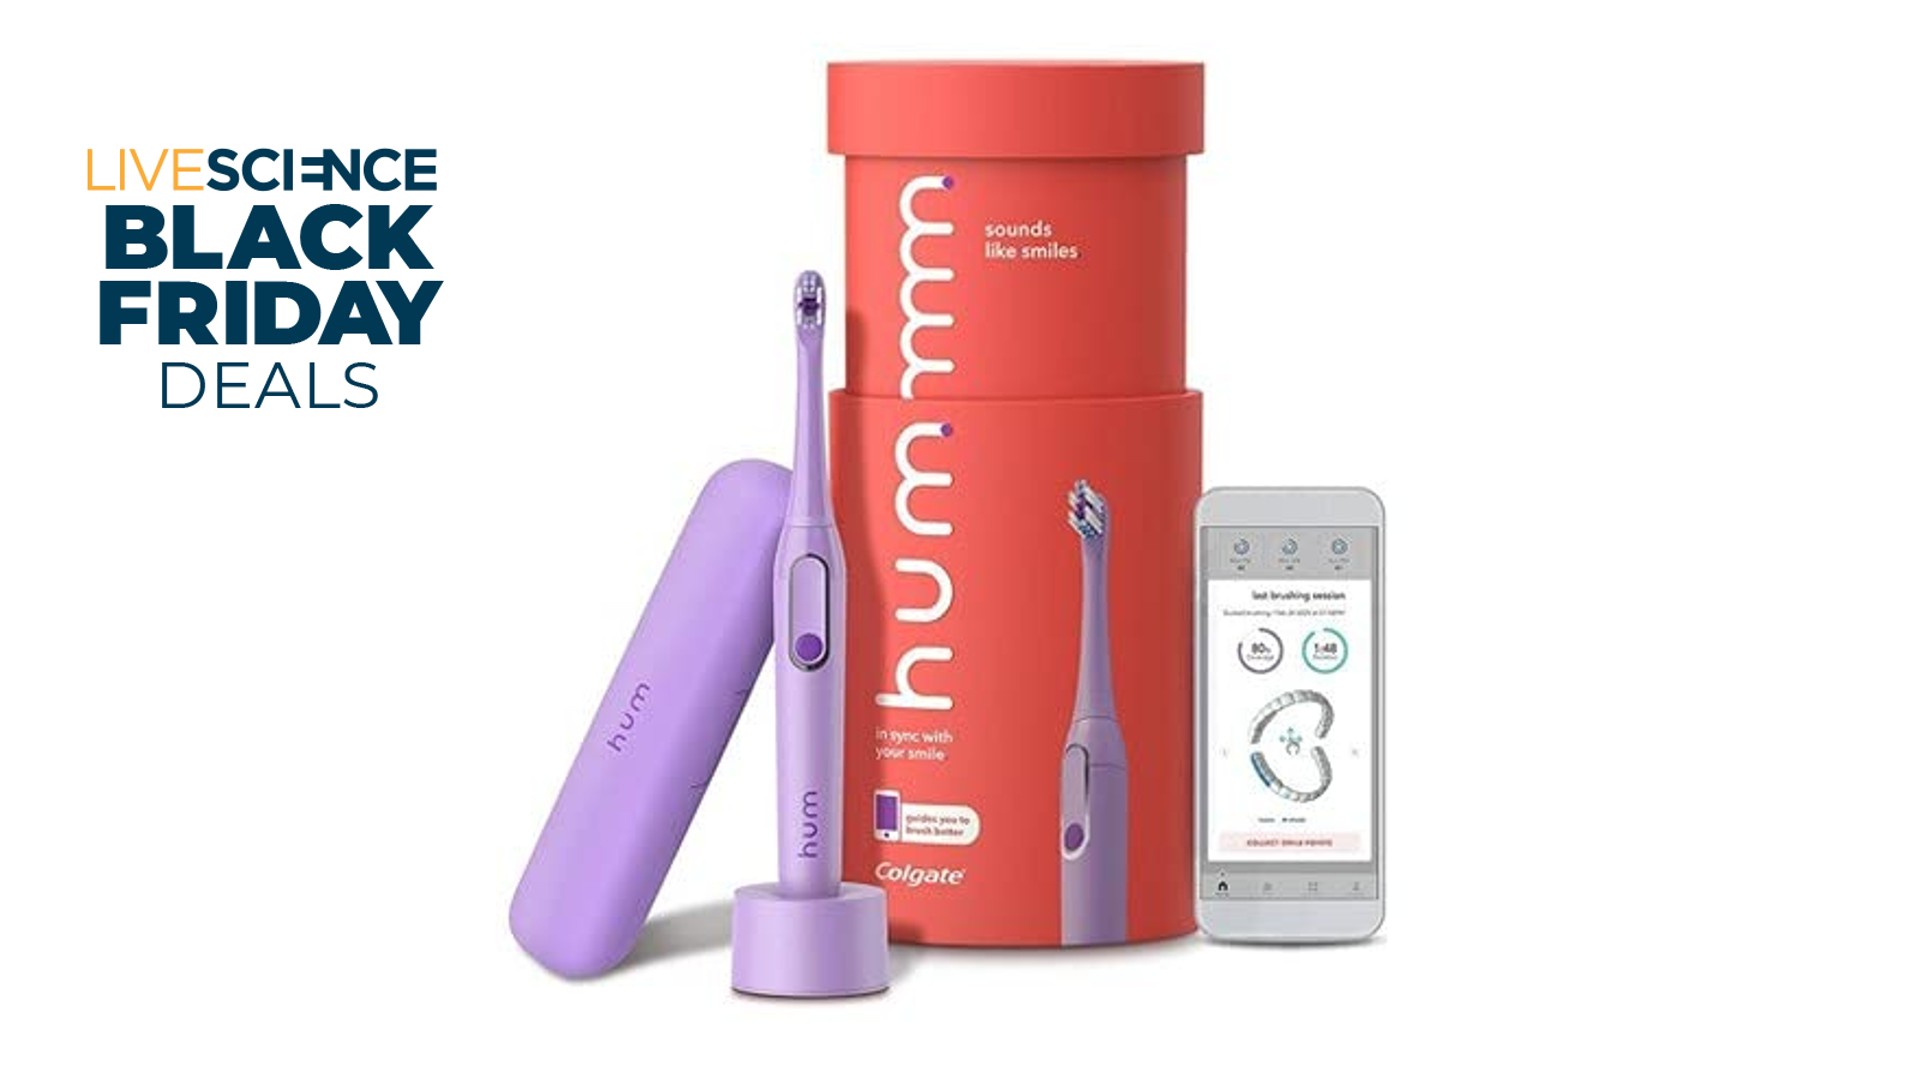 Get 65% off hum by Colgate in this fantastic Black Friday electric toothbrush deal